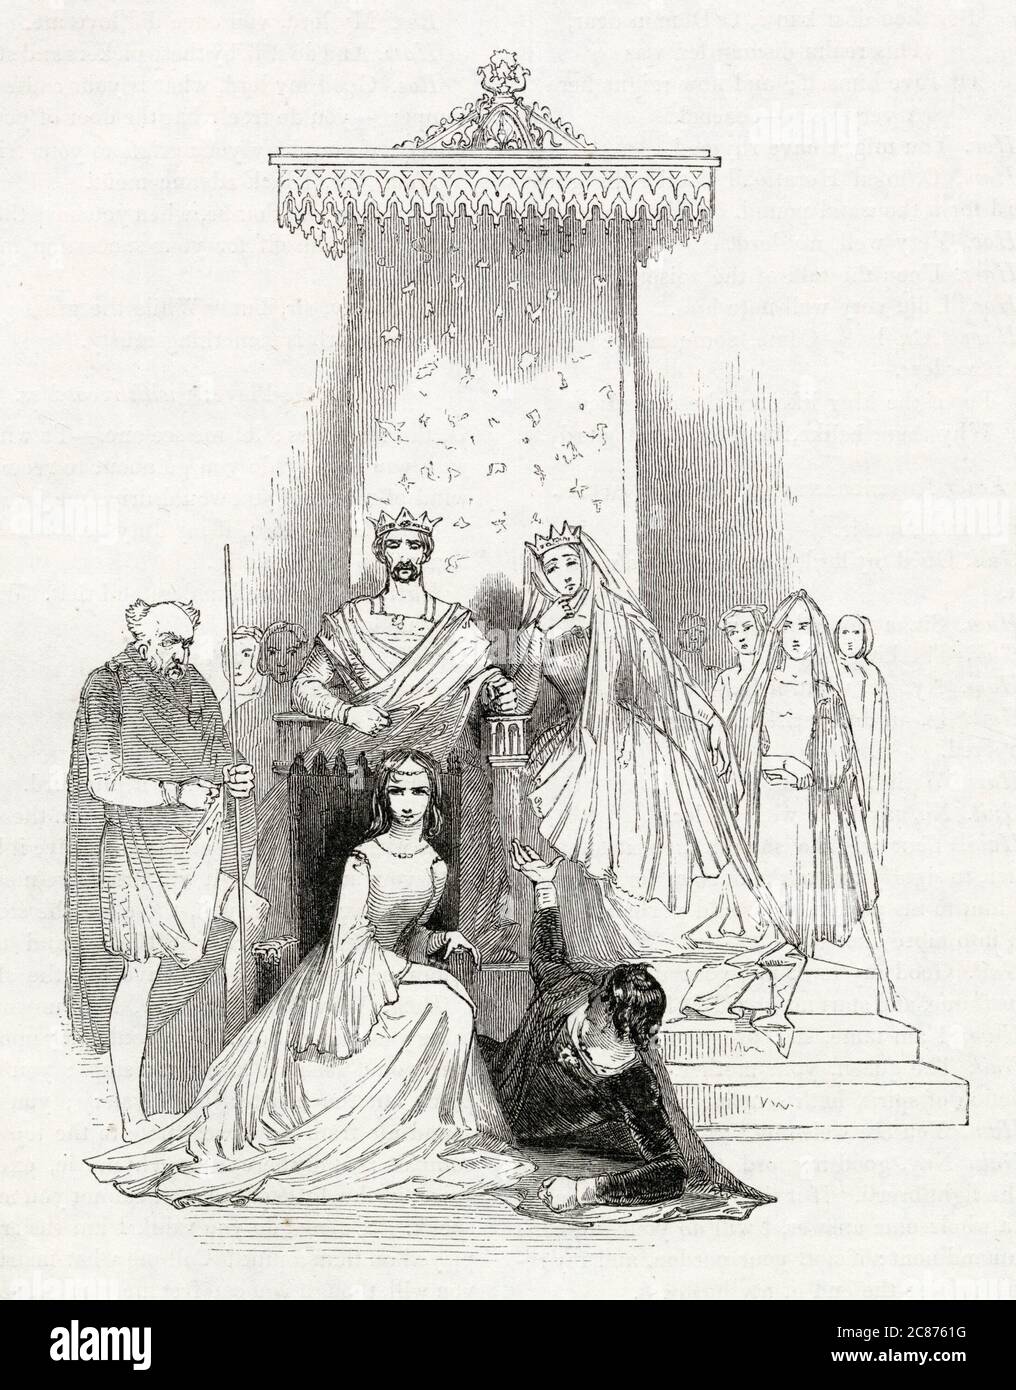 Illustration by Kenny Meadows to Hamlet, Prince of Denmark, by William Shakespeare. King Claudius, Queen Gertrude, Hamlet, Ophelia, Polonius and courtiers, watching the play within the play, designed to confirm Claudius's guilt in killing his brother. Stock Photo